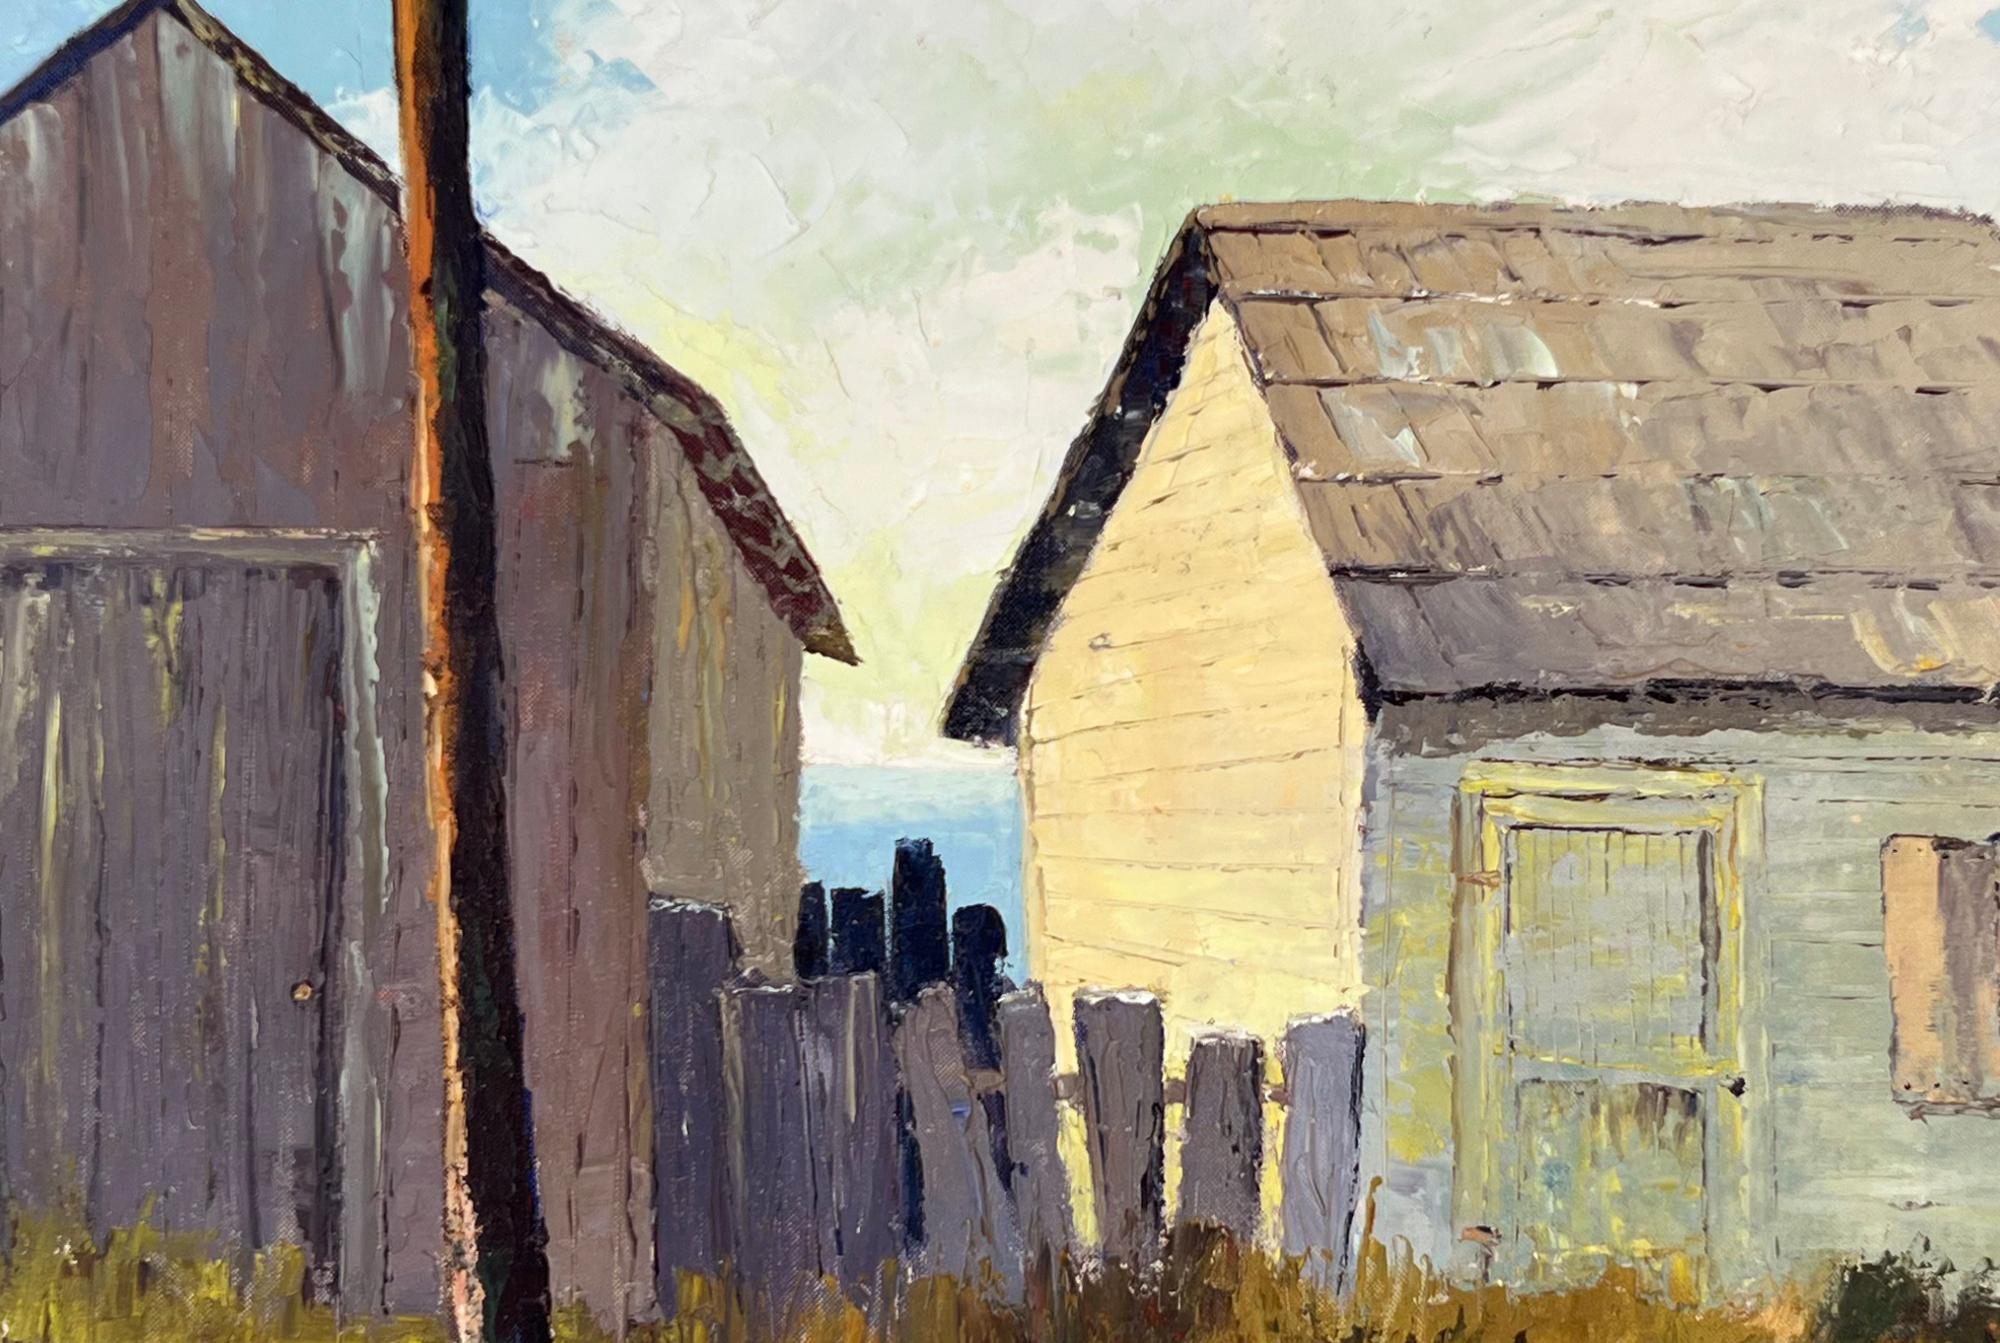 Shacks by the Sea - California Coastal Landscape in Oil on Artist's Board

Textured coastal landscape by Jon Blanchette (American, 1908-1987). Two small shacks or sheds are side by side at the edge of the California coast. between them, there is a